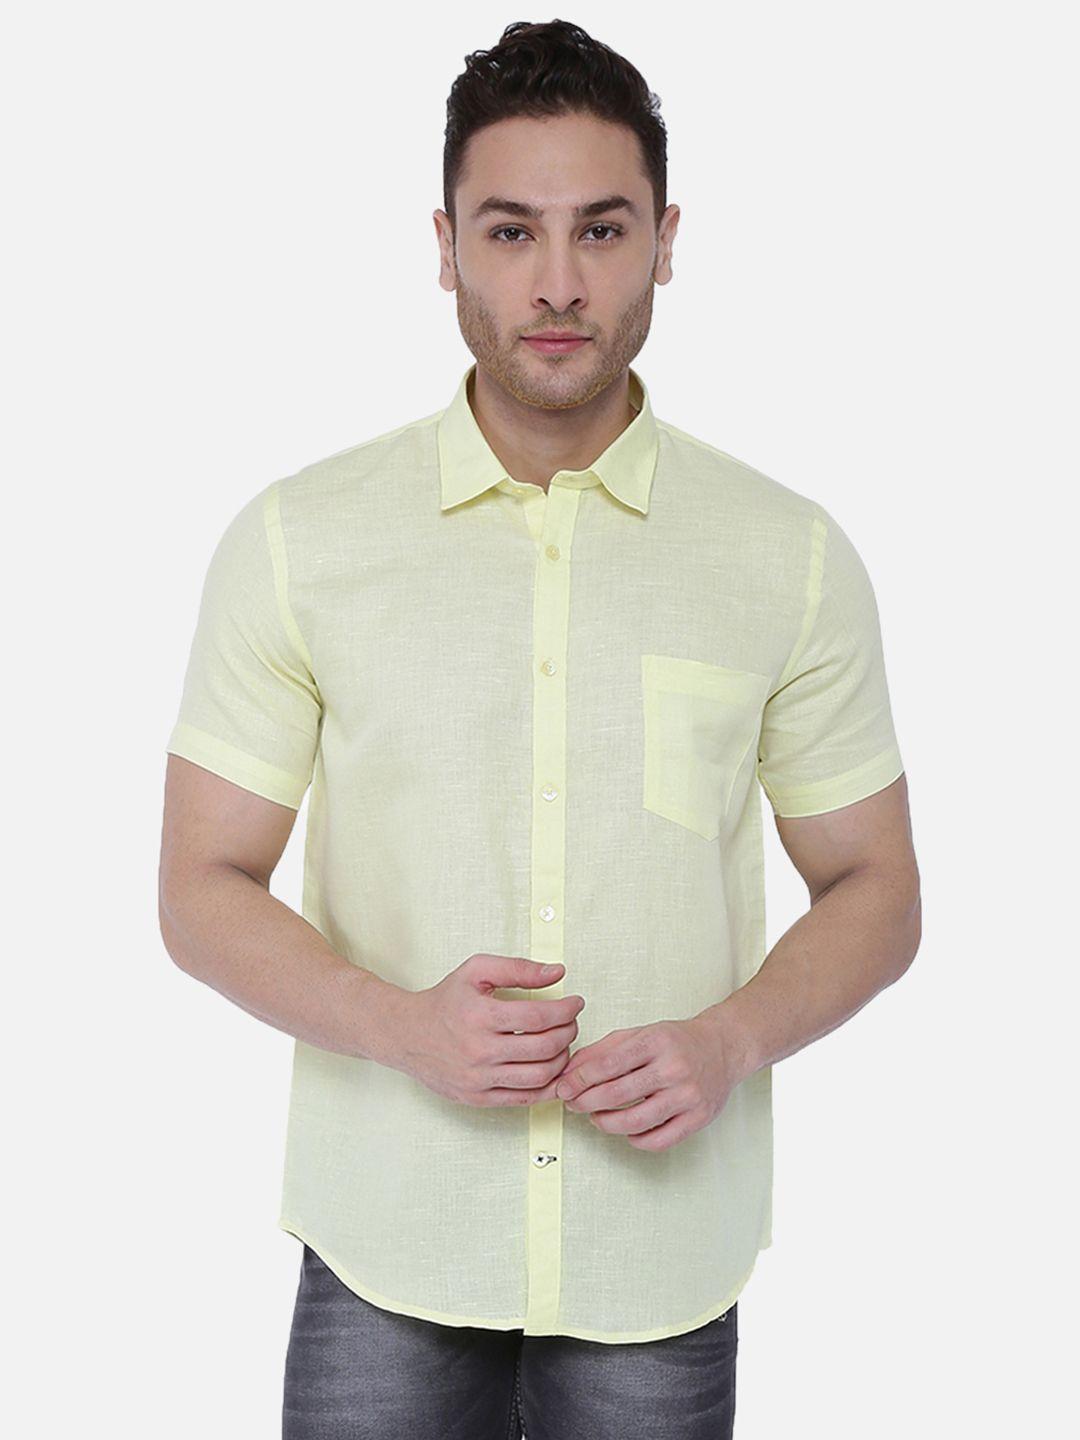 southbay-men-smart-tailored-fit-casual-shirt